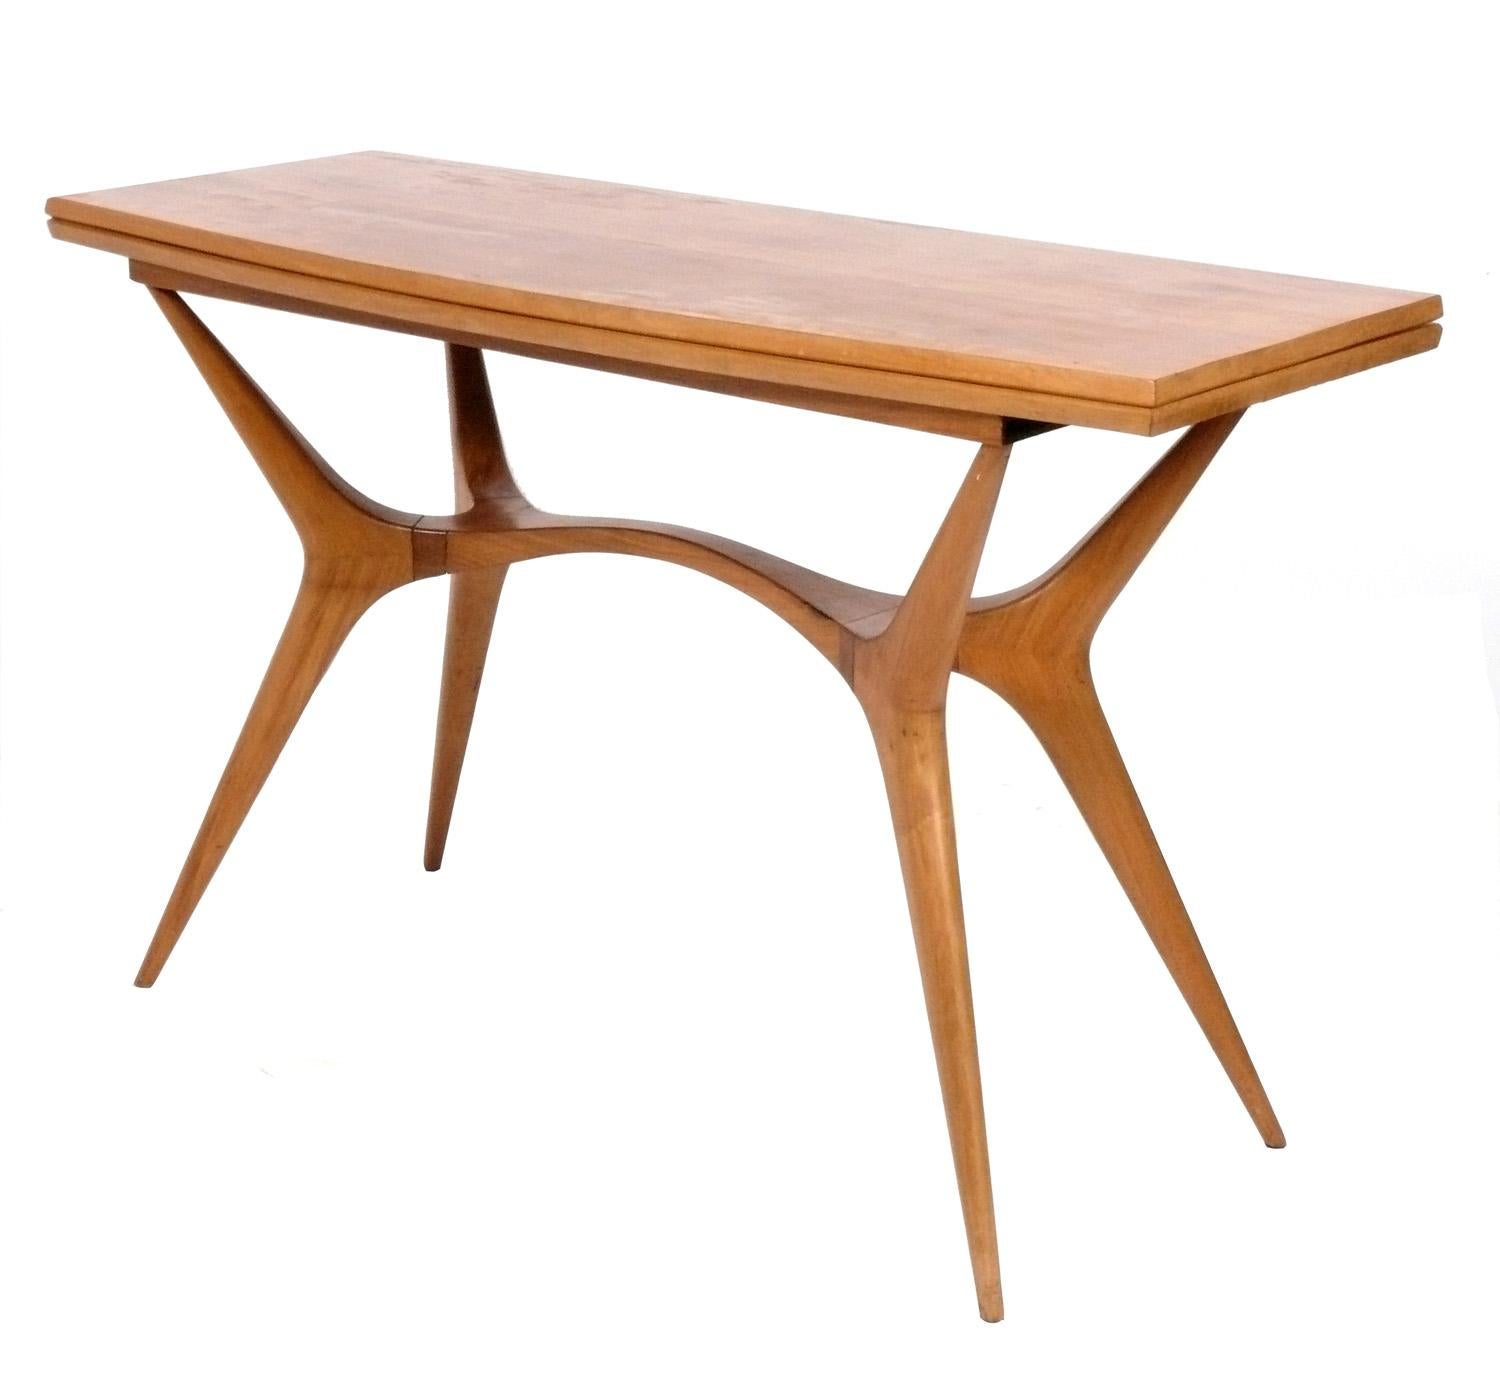 Sculptural Flip Top Console / Dining Table, designed by Giuseppe Scapinelli, Brazil, circa 1950s. We originally thought this table was a Vladimir Kagan design when we first saw it, due to the swooping sculptural legs. We were surprised to find the